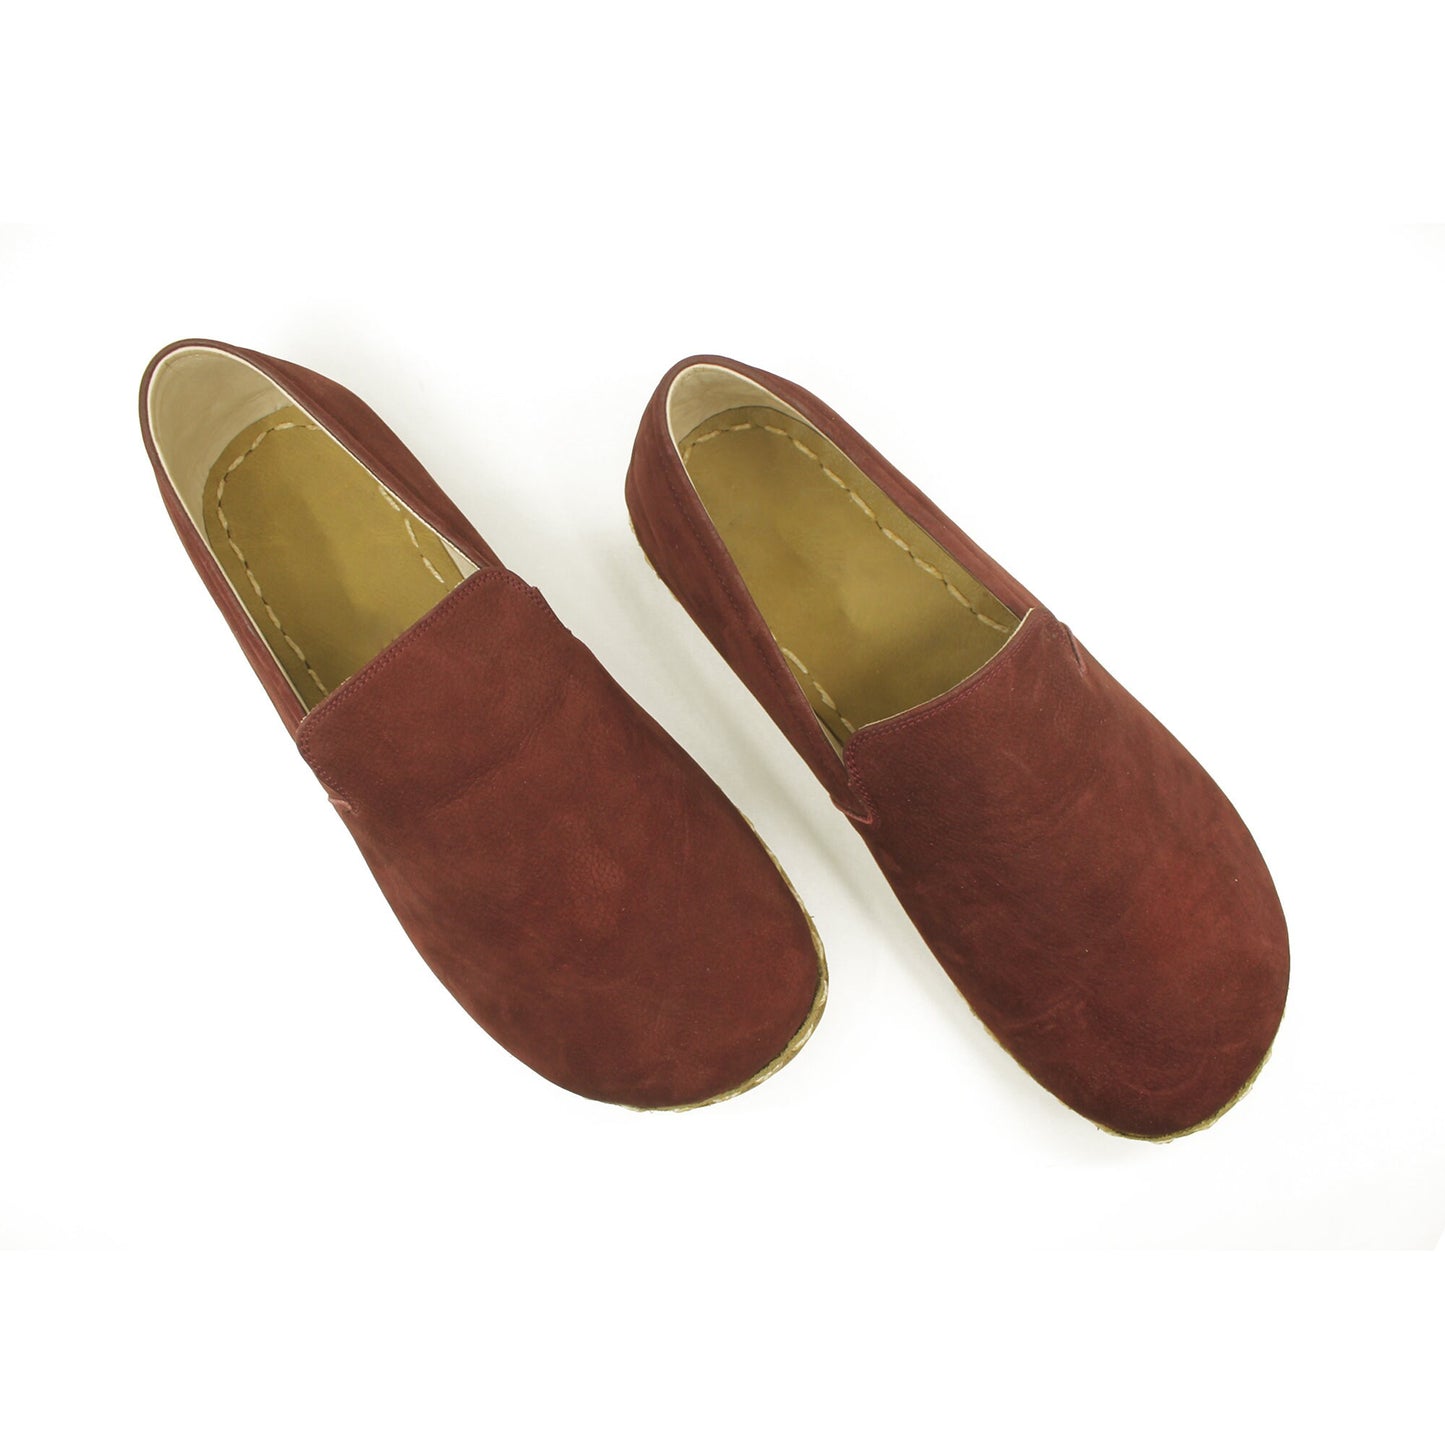 Claret Red Barefoot Shoes for Men - Leather Zero Drop, Wide Minimalist Shoes, Wide Toe Box, Summer Dress Shoes